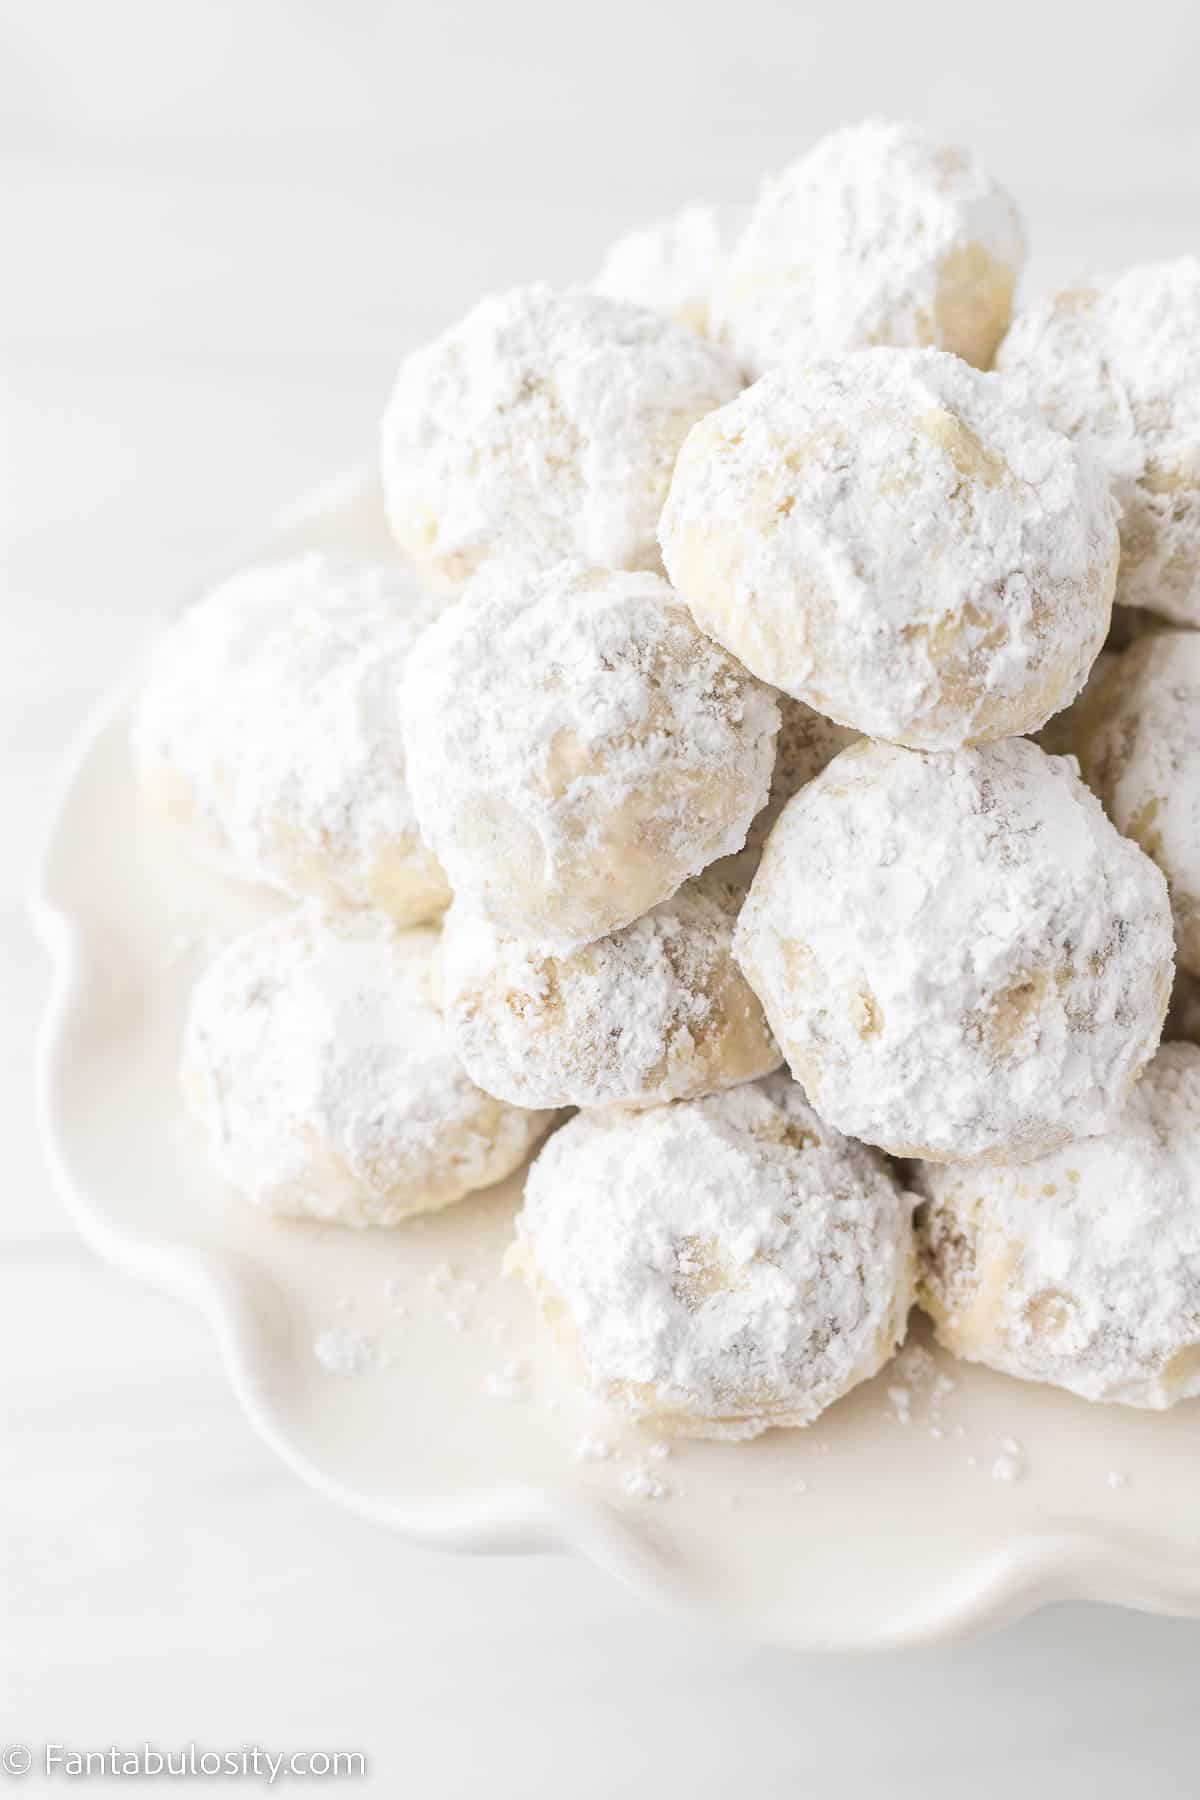 A close of photo of powdered sugar coated snowball cookies piled on a decorative white cake stand